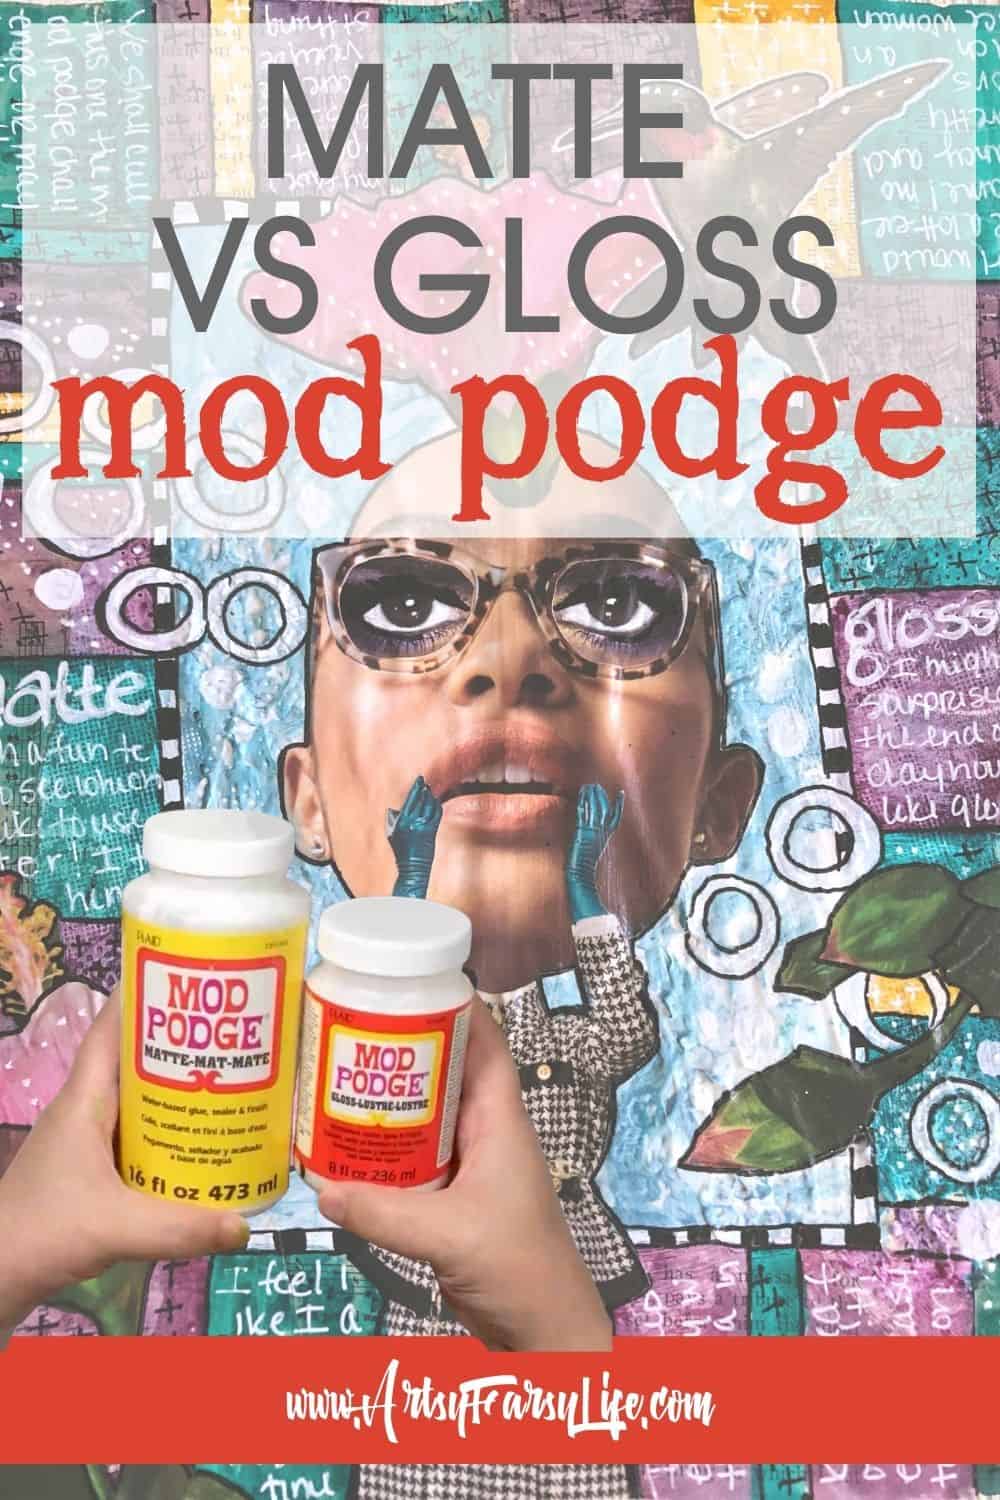 New varnish and sealer for art - modge podge and deco art